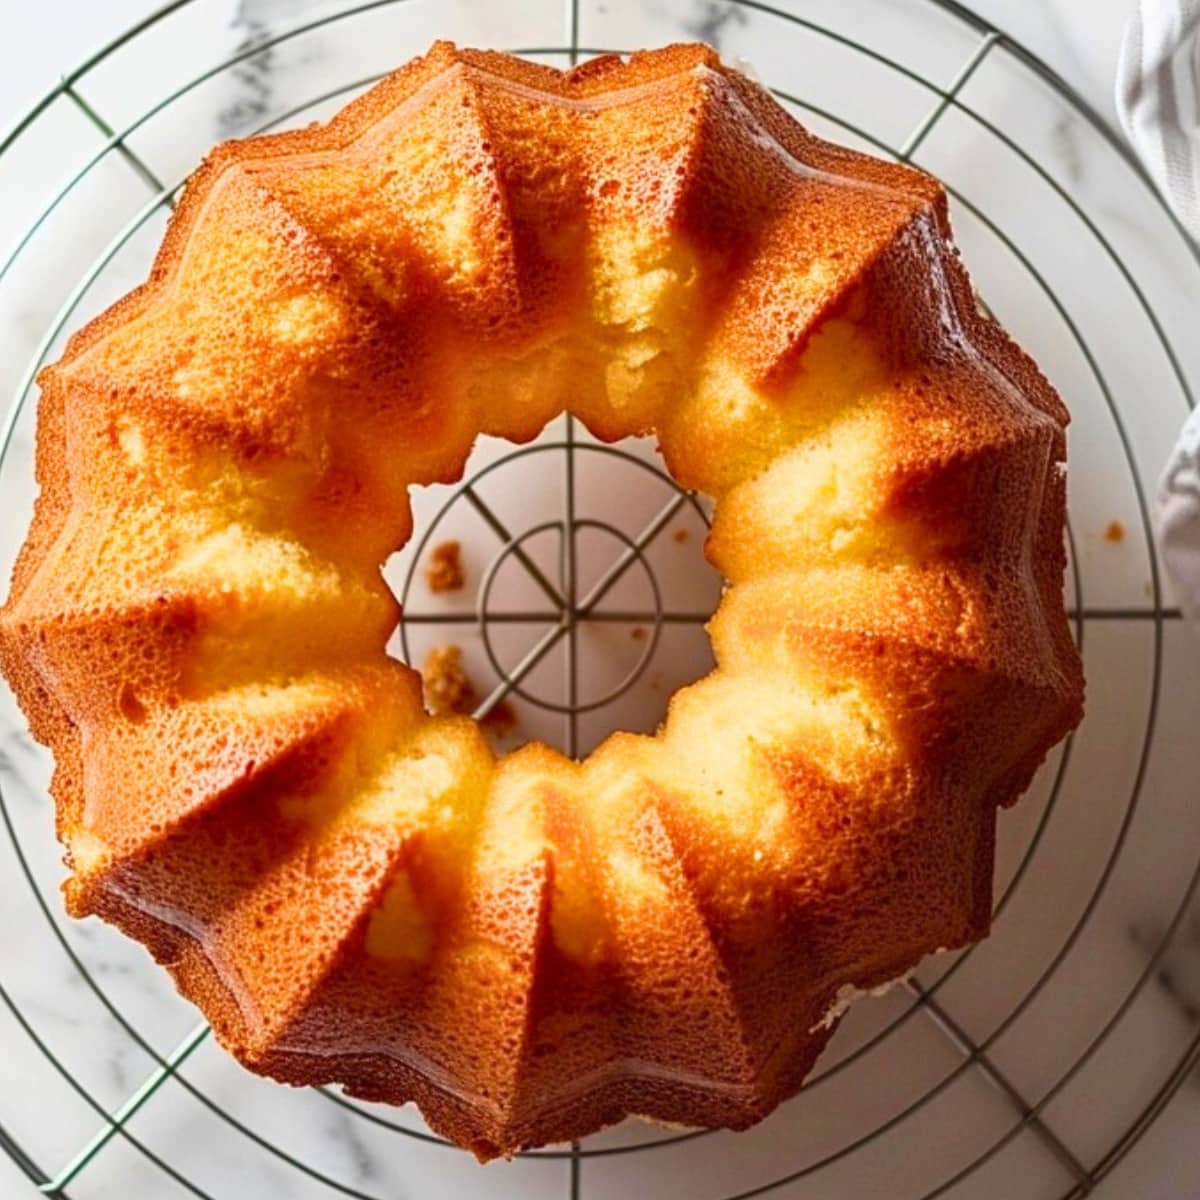 Top view of million dollar pound cake on a cooling rack.